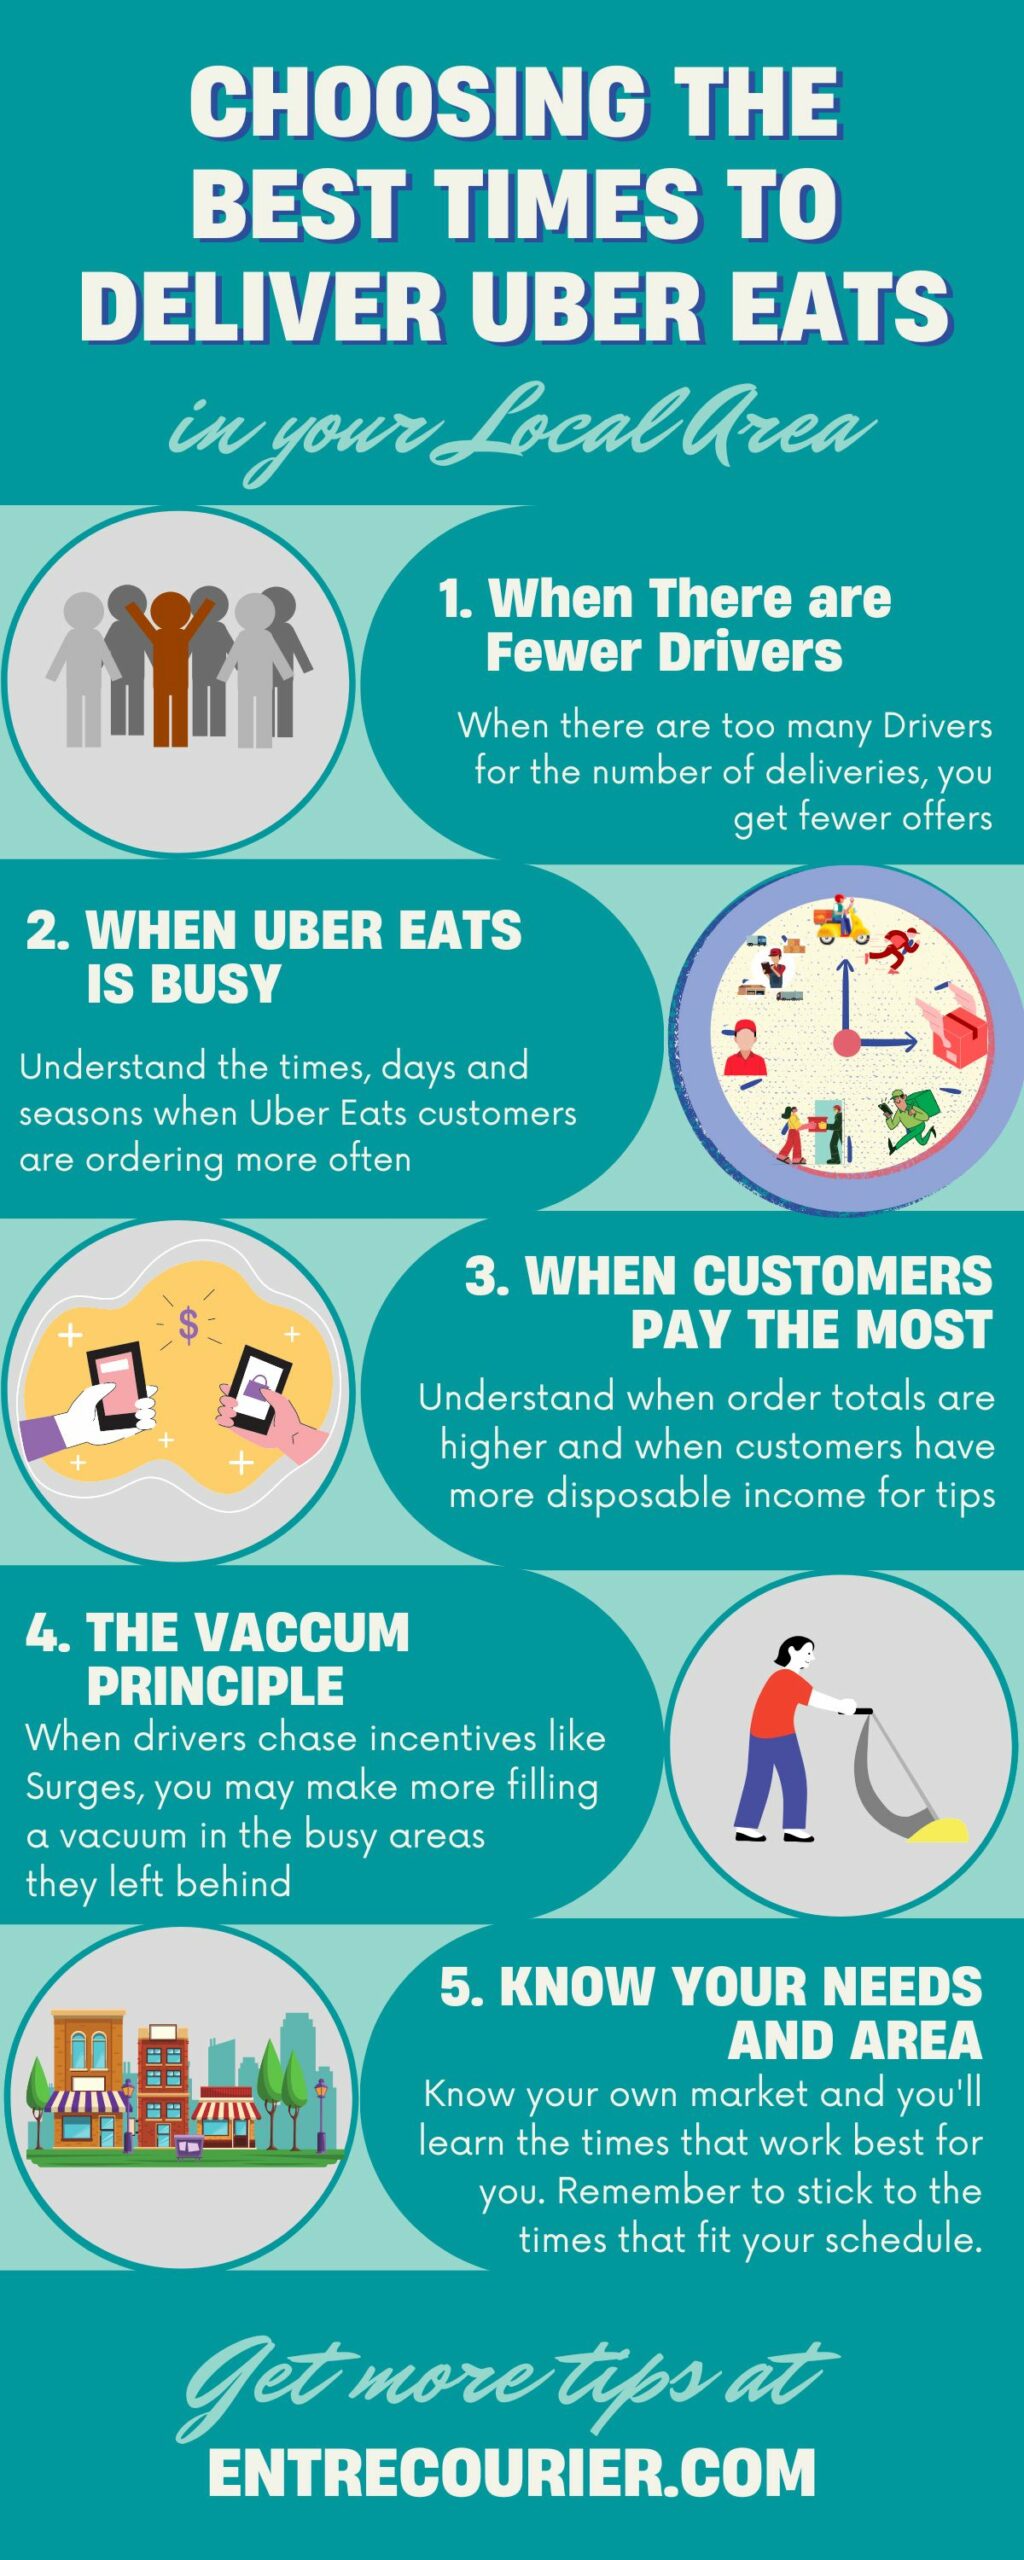 Infographic of how to determine the best times to deliver for Uber Eats including knowing when there are fewer competing drivers, when Uber Eats is busy, when customers pay the most, understanding the vacuum principle and knowing your own needs and market.